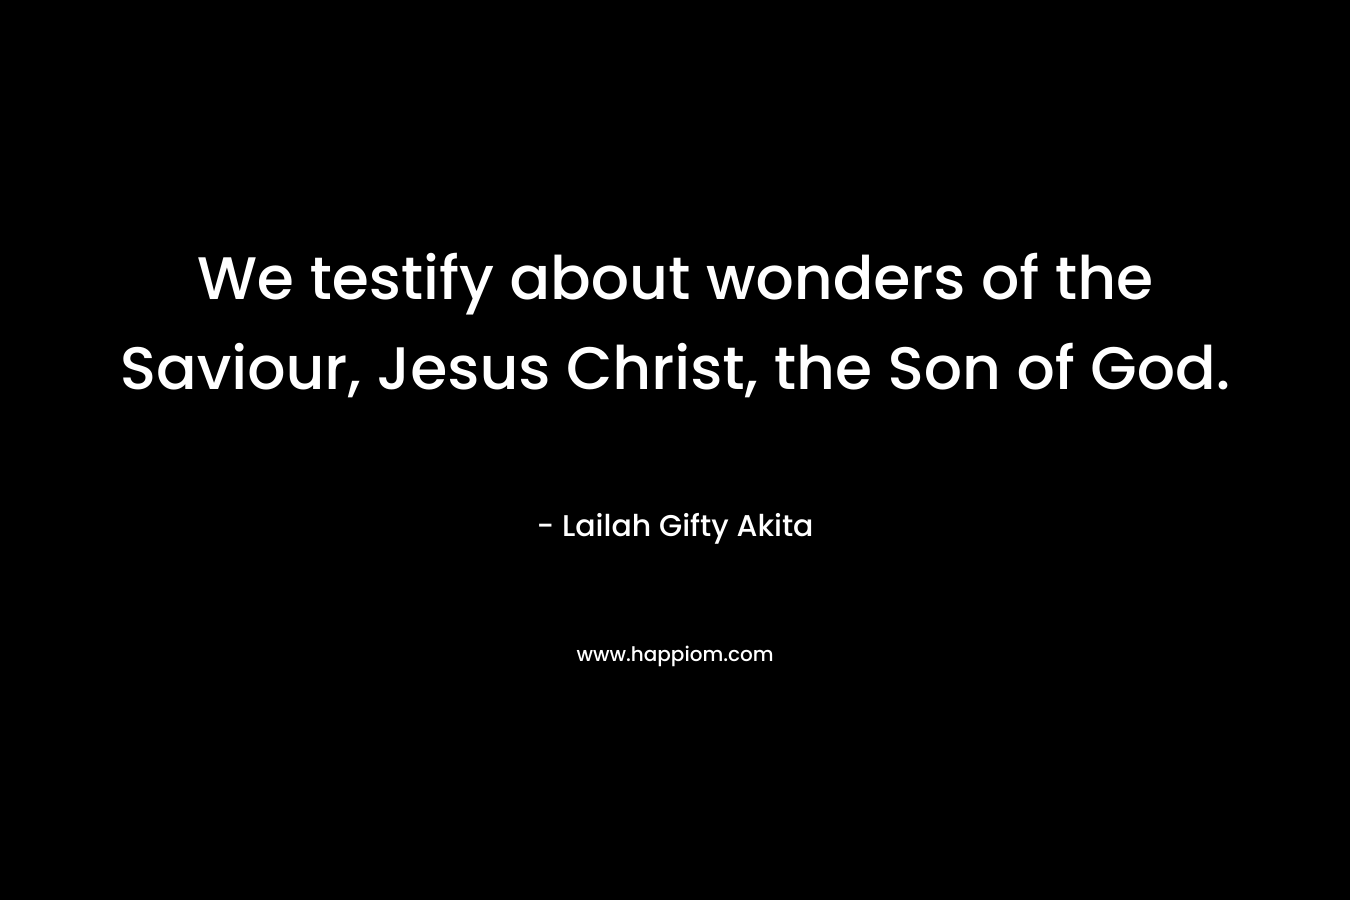 We testify about wonders of the Saviour, Jesus Christ, the Son of God. – Lailah Gifty Akita